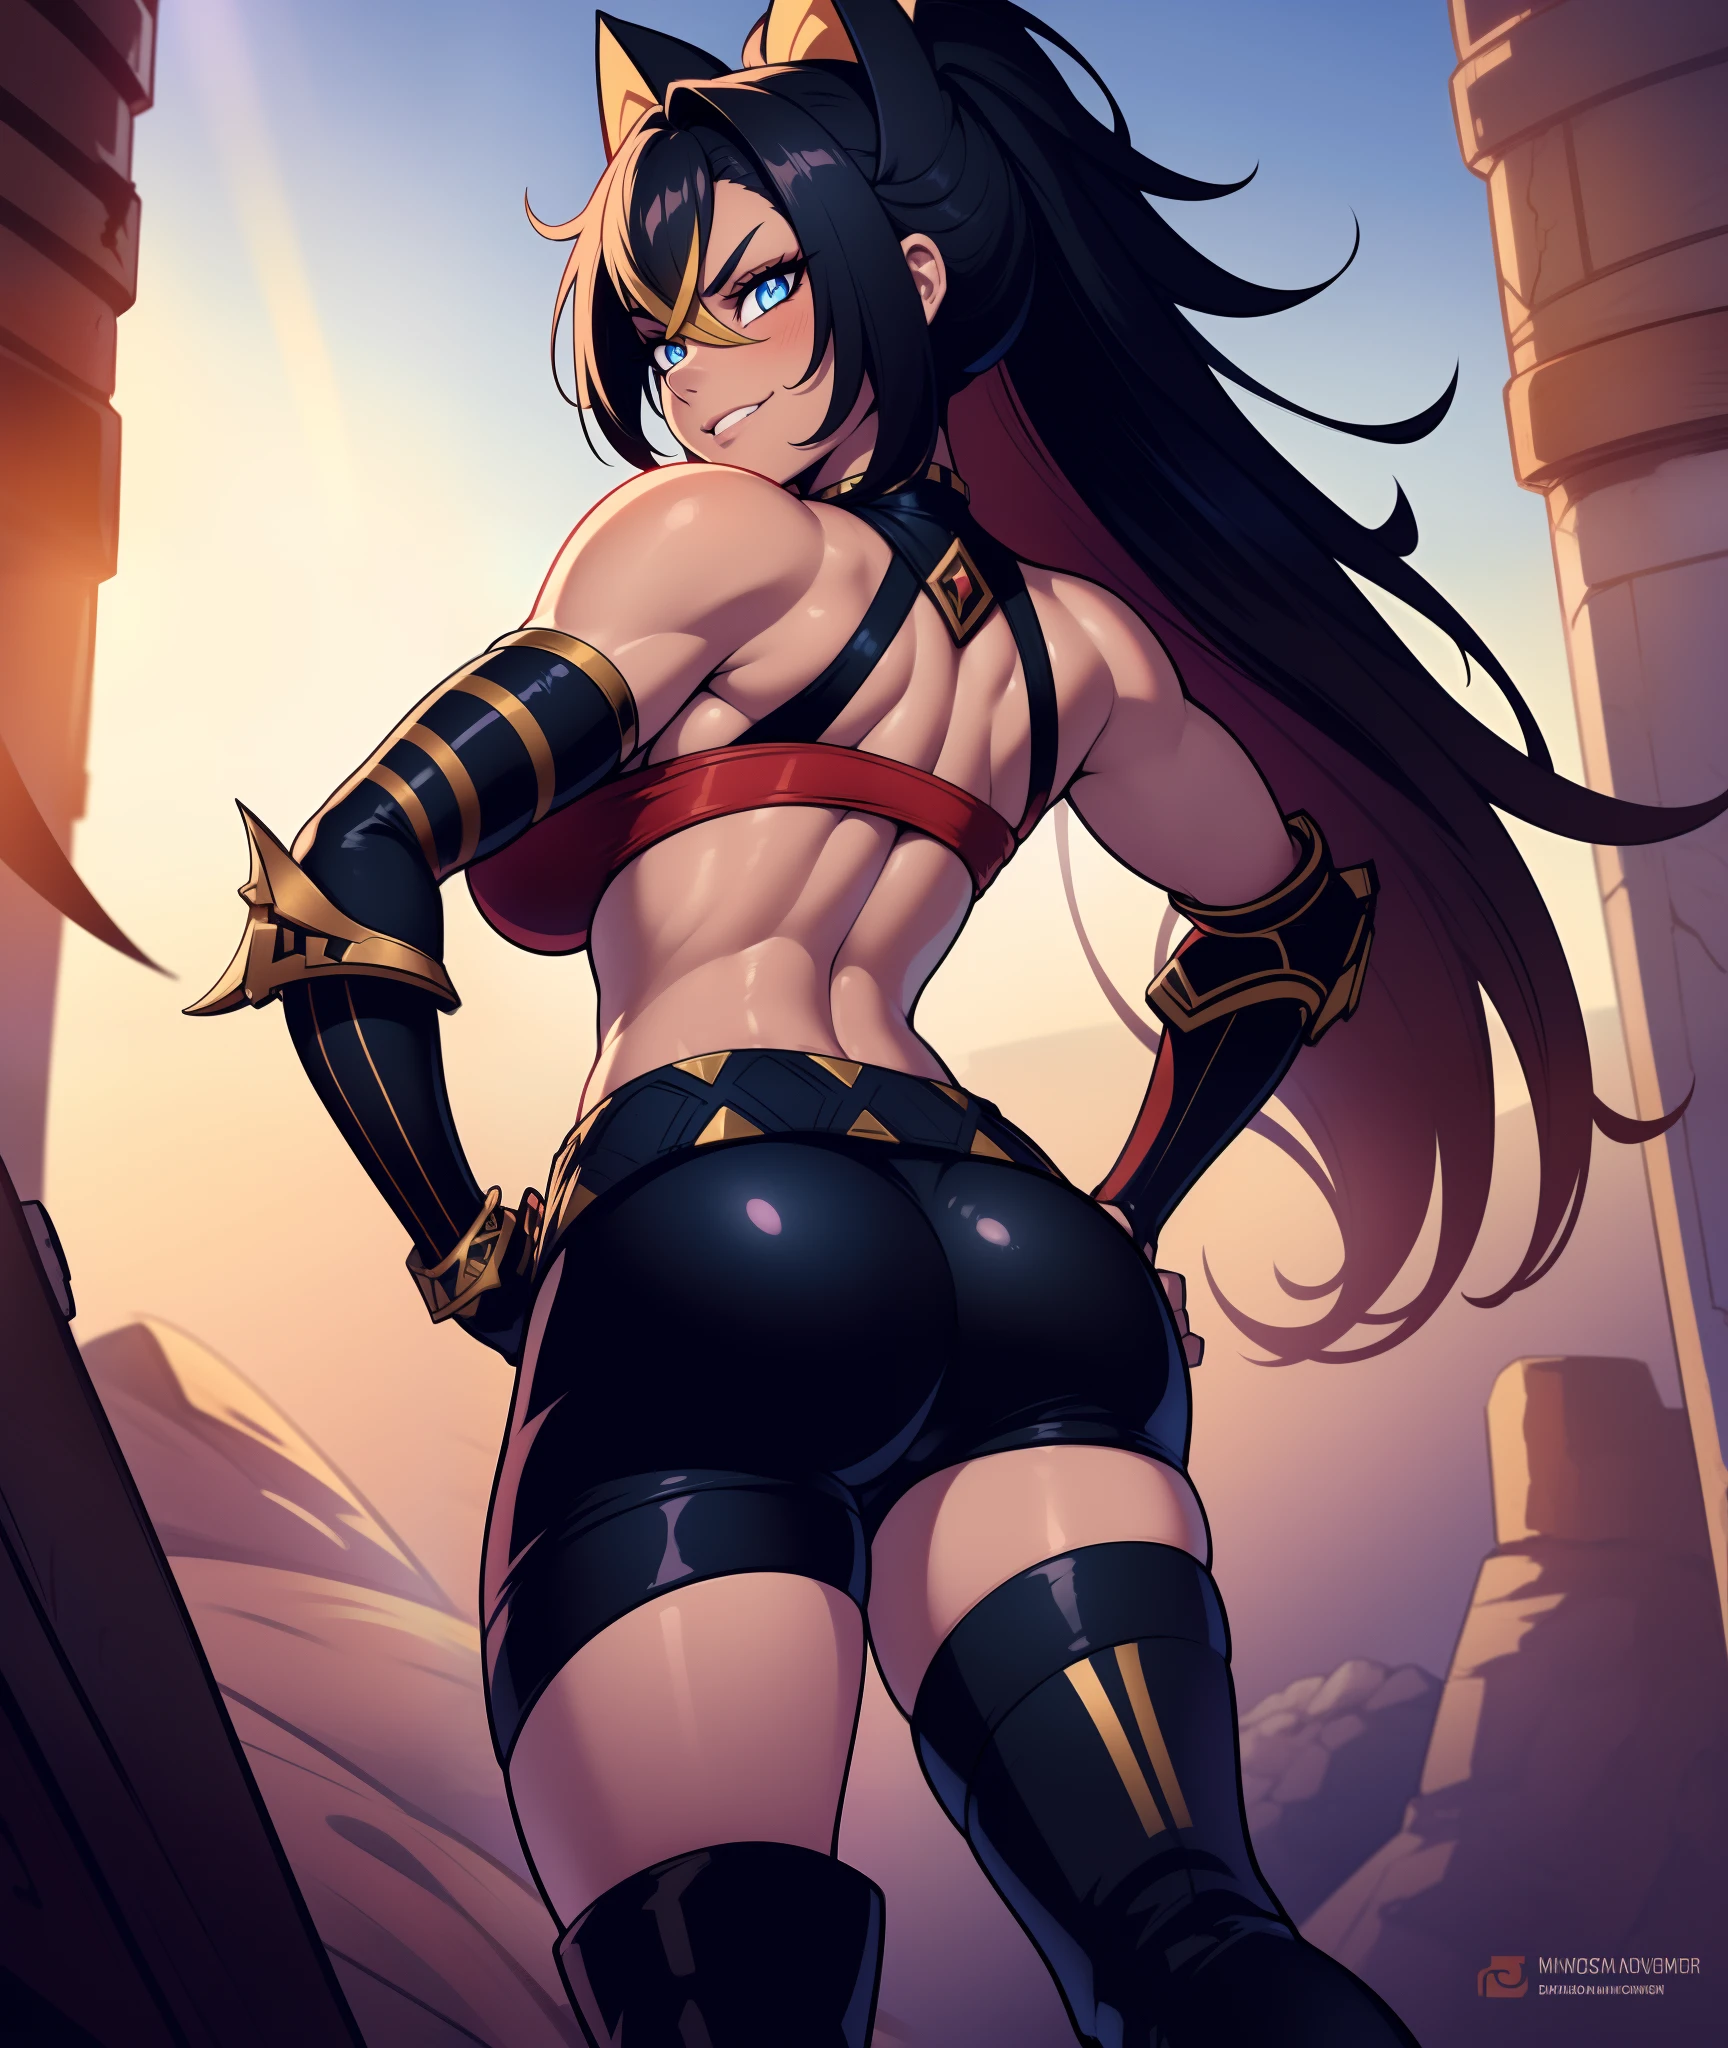 [dehya], [(genshin_impact)], ((masterpiece)), ((solo portrait)), ((back view)), ((cinematic lighting)), ((high quality)), ((HD)), ((anime)), ((detailed shading)), ((cinematic lighting)), ((intricate details)), {beautiful woman; beautiful eyes, (glowing light-blue pupils), long black hair gold highlights, (medium-sized boobs), (defined abs), (defined muscular legs), (defined arm muscles), (smug smirk), (white teeth)}, {(red and black top), black shorts, knee-high boots, gauntlets, leg straps, cat ears}, {(standing), (dynamic pose)}, [Background; (desert), (blue sky), (sun rays)]